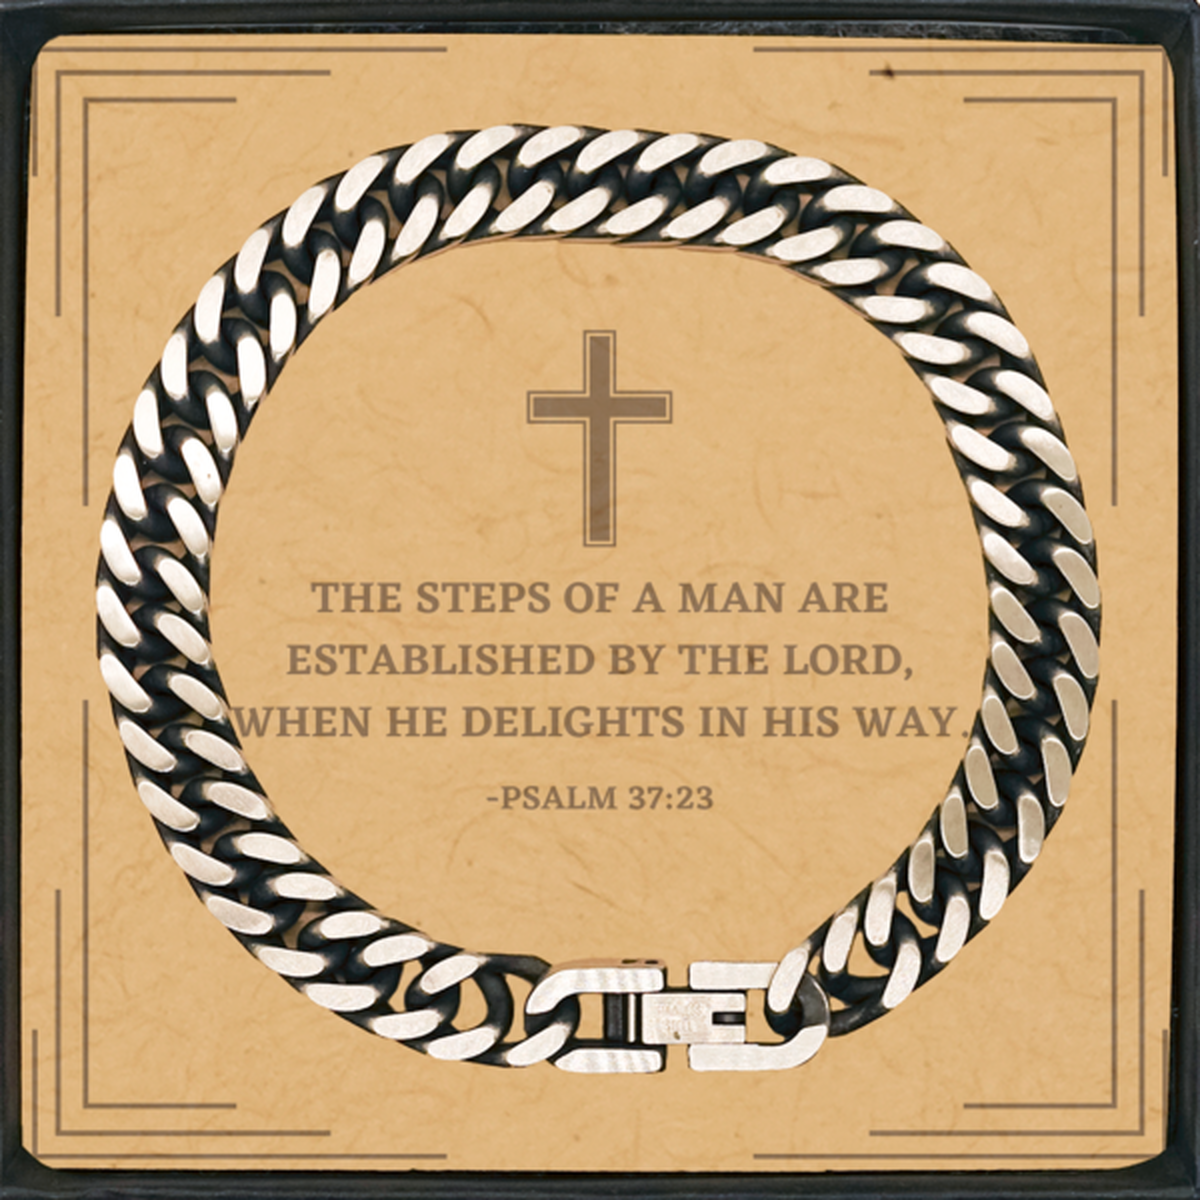 Baptism Gifts For Teenage Boys Girls, Christian Bible Verse Cuban Link Chain Bracelet, The steps of a man are, Confirmation Gifts, Bible Verse Card for Son, Godson, Grandson